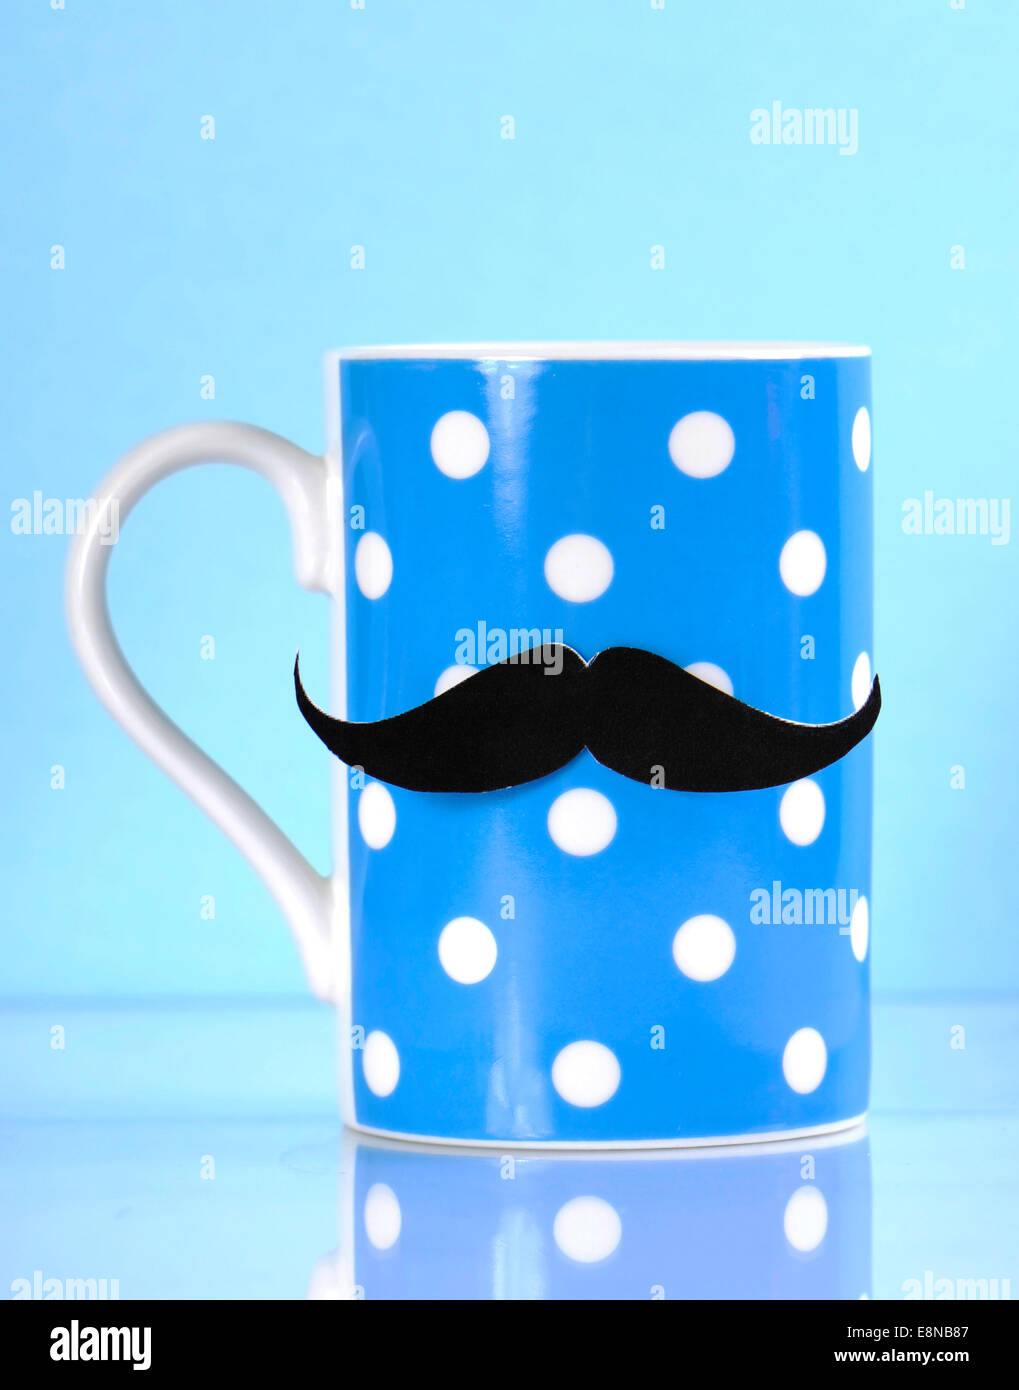 Fundraising for mens health awareness charity with mustache on blue polka dot coffee mug cup on blue background. Stock Photo